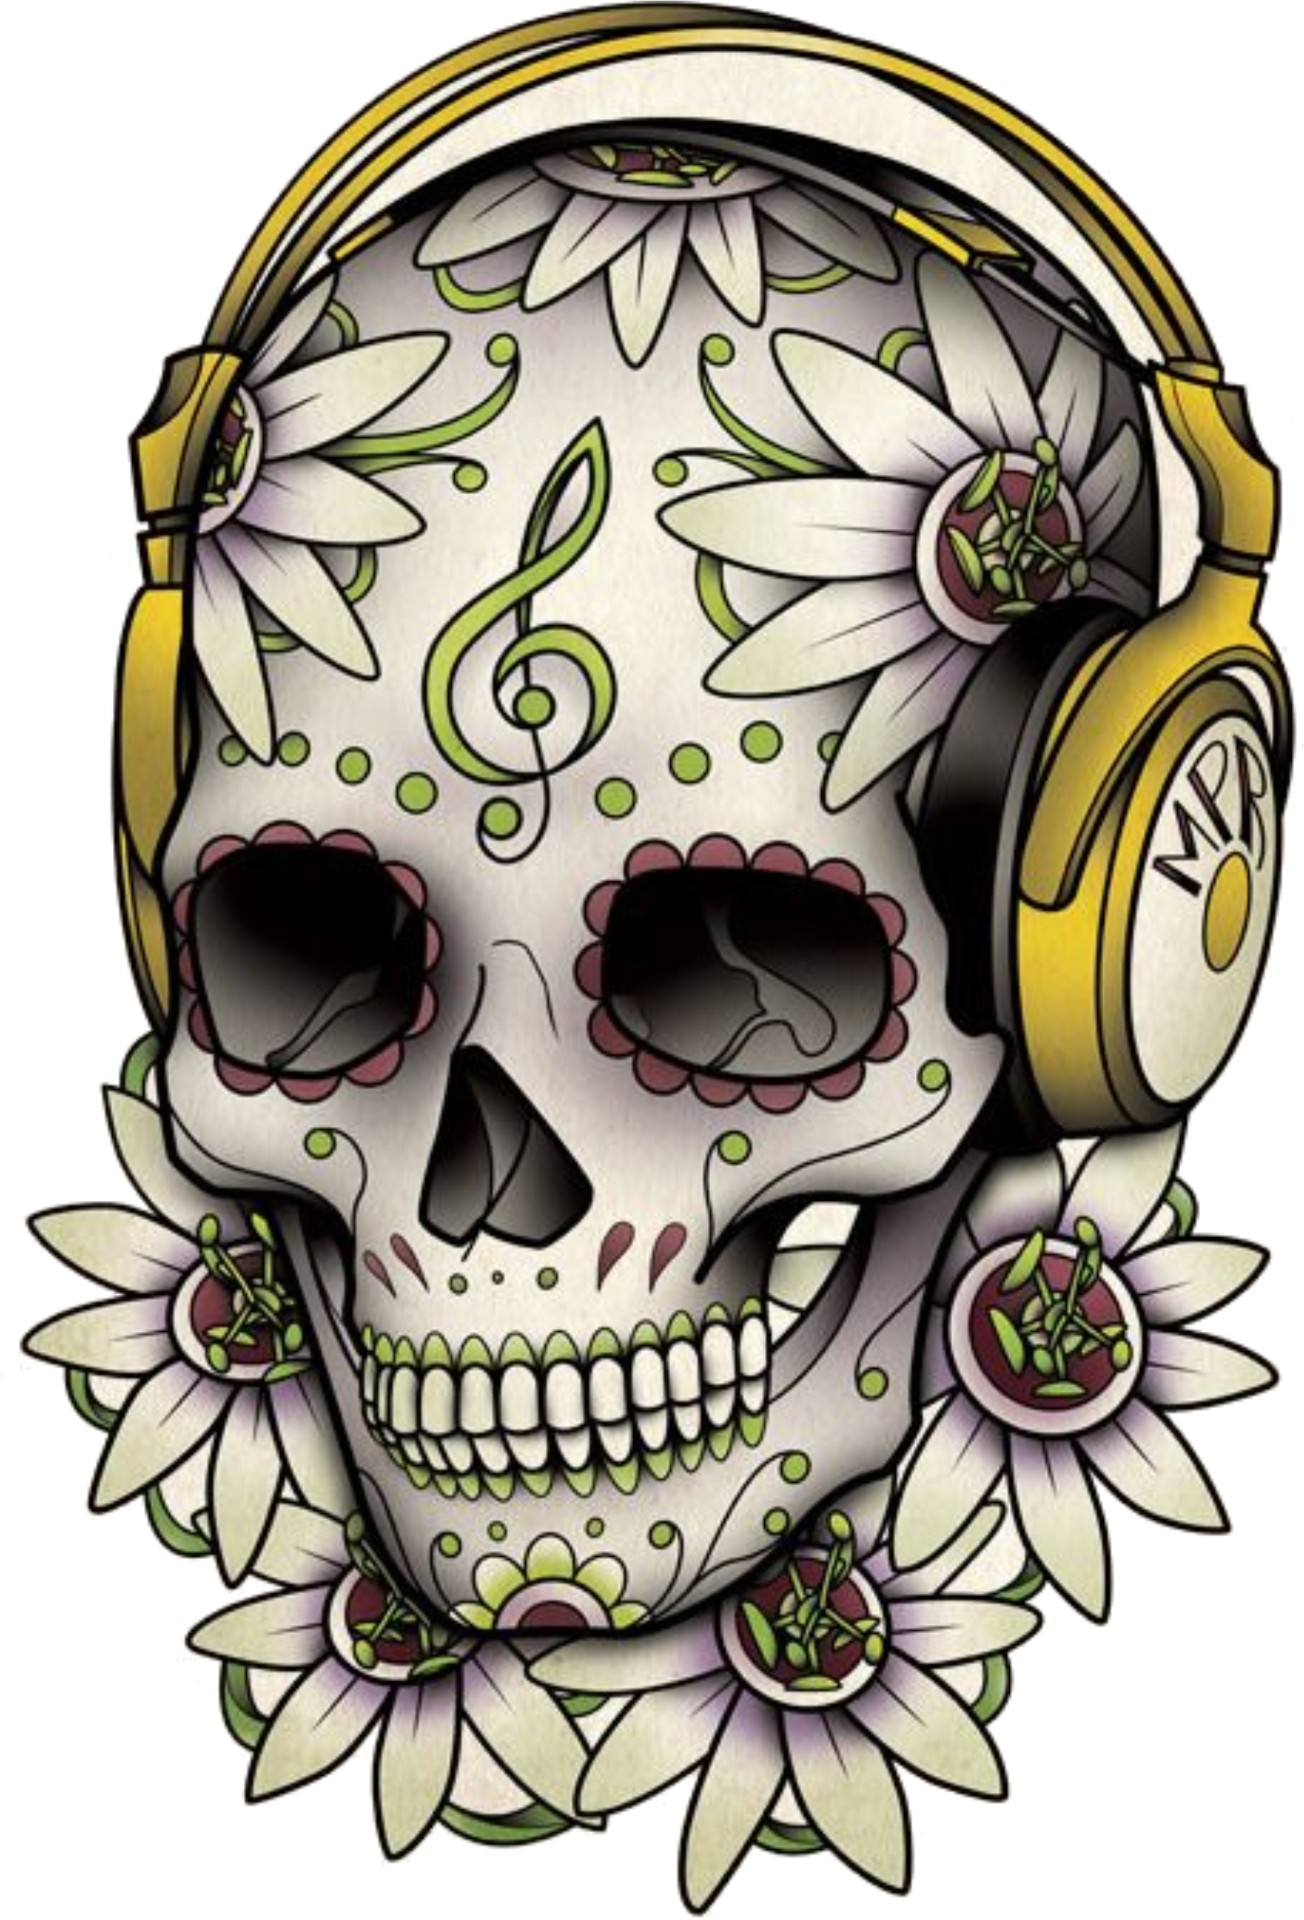 Tattoo Skull Calavera Dead Drawing Of The PNG Image